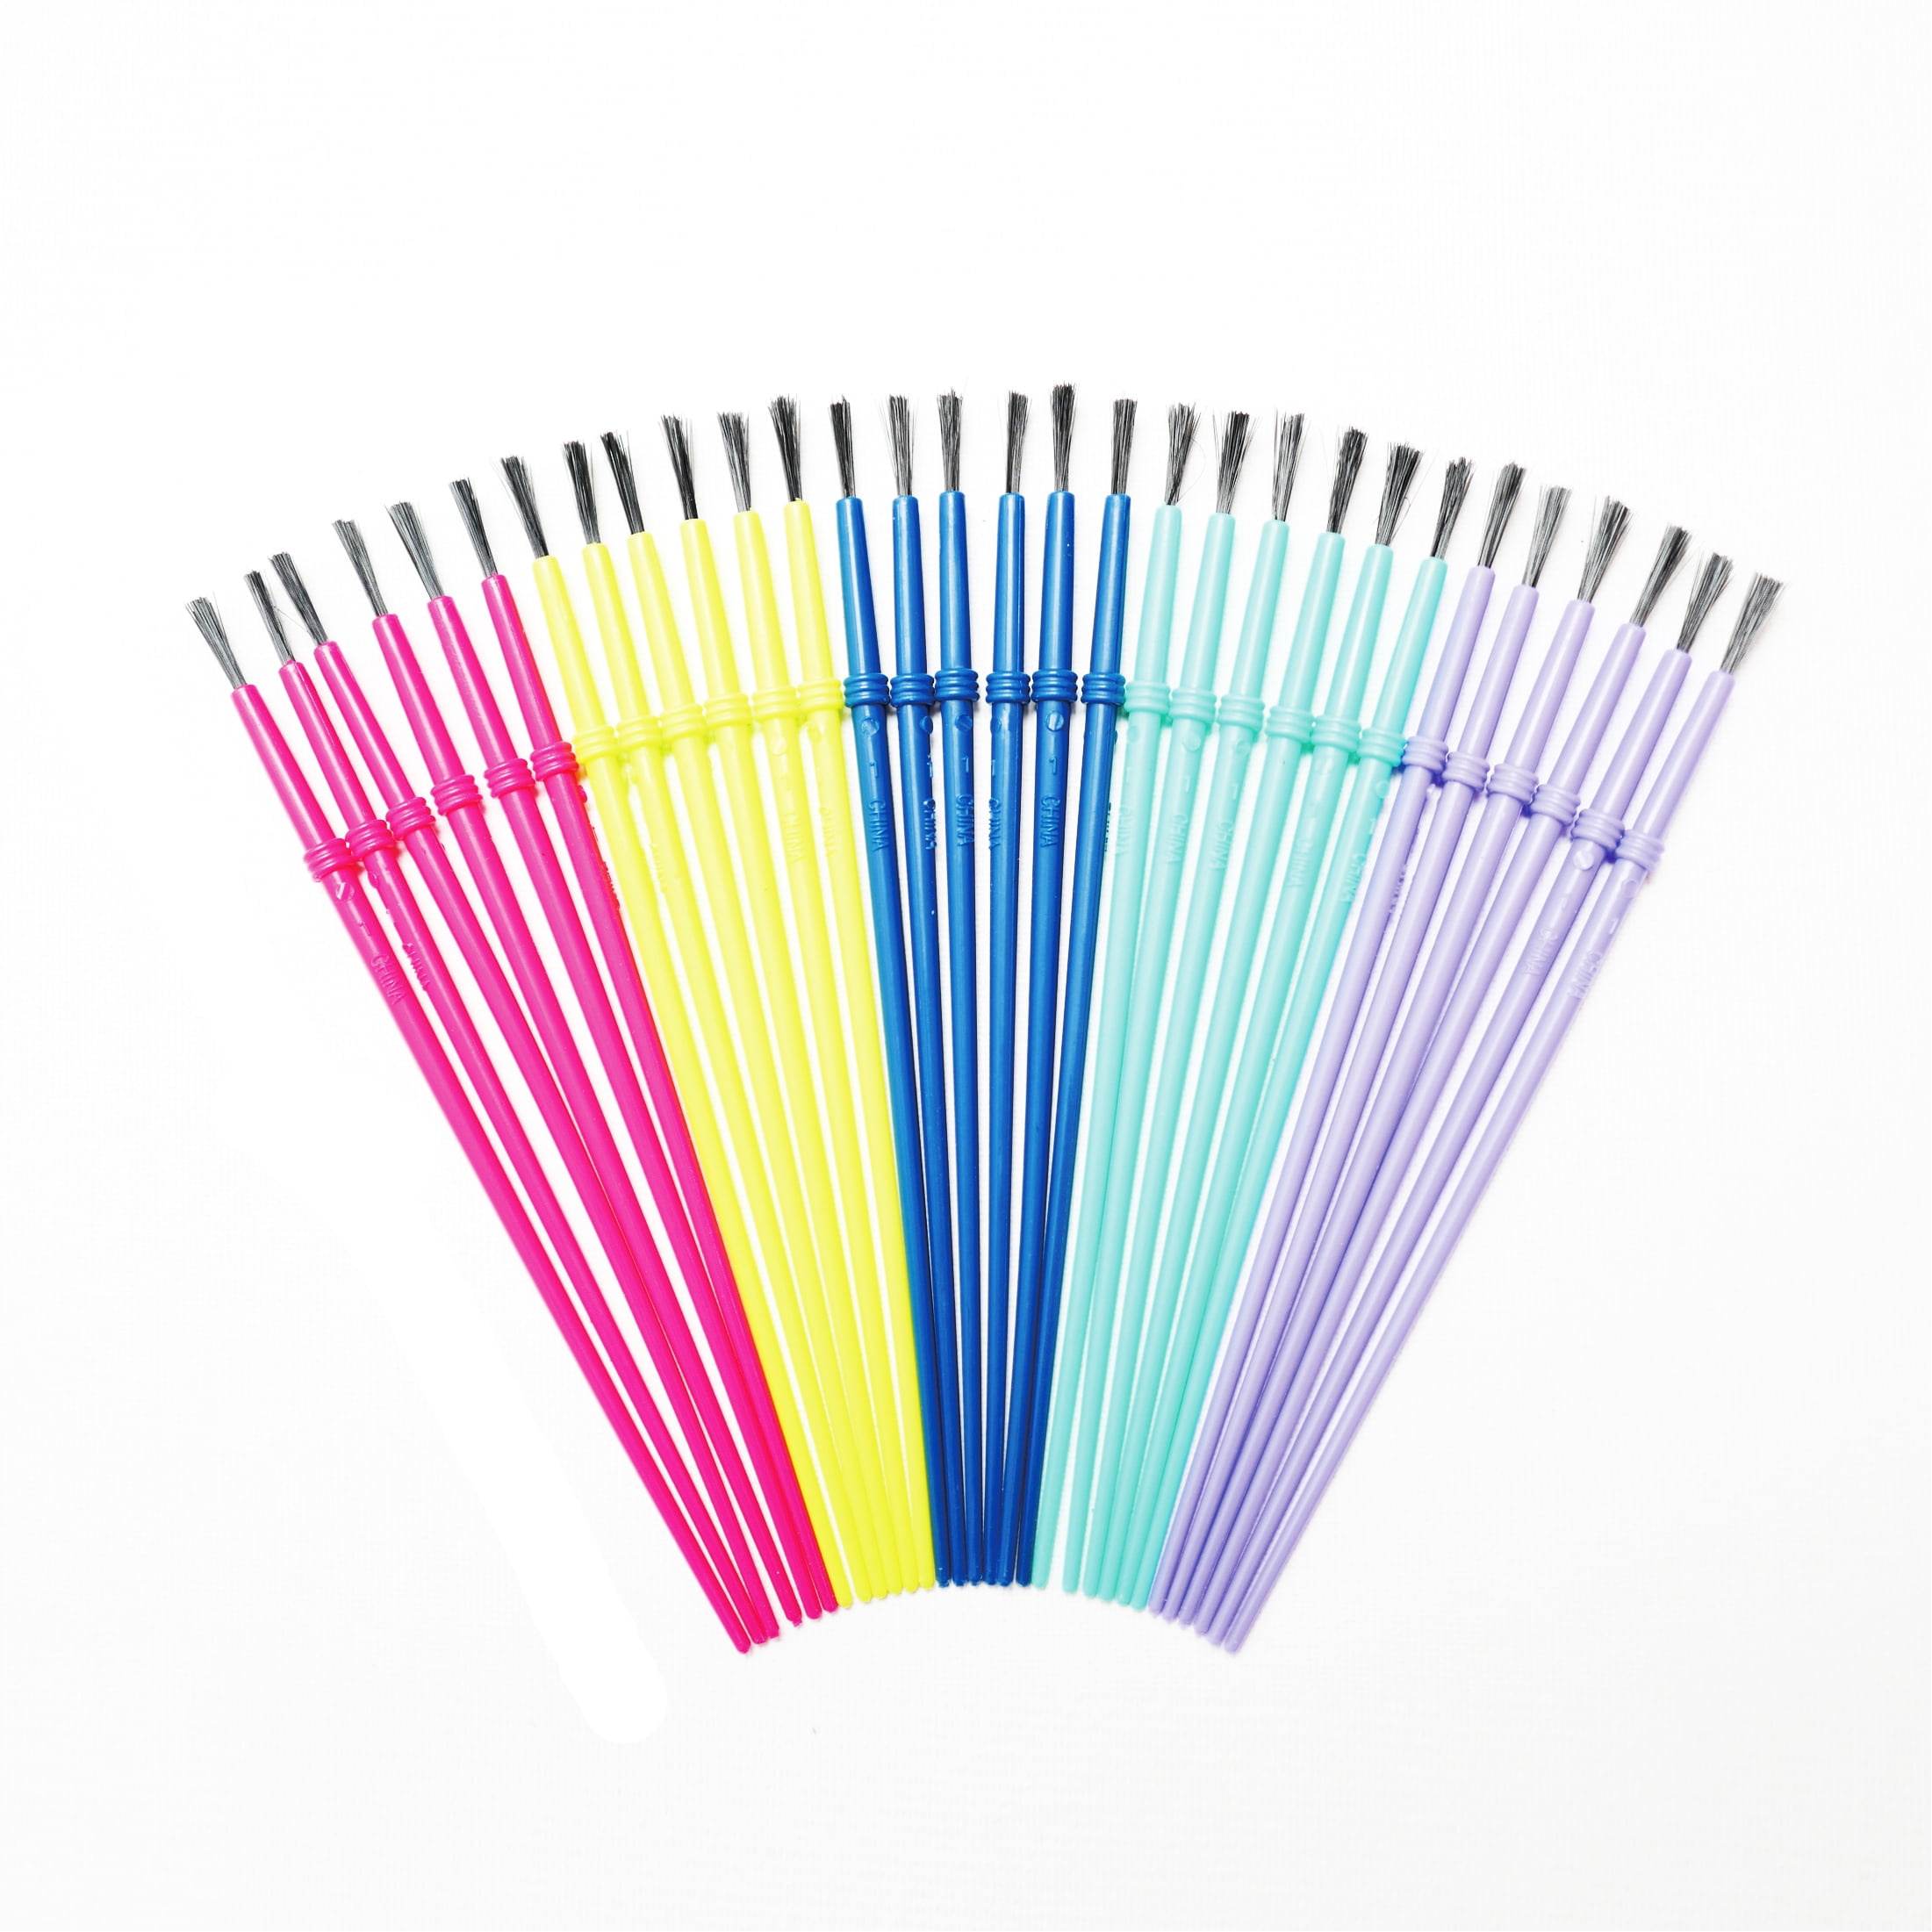 Hello Hobby Round, Filbert, Flat, Fan, Liner Synthetic Bristle Art Brushes  (15 Pieces), Age Group 3+